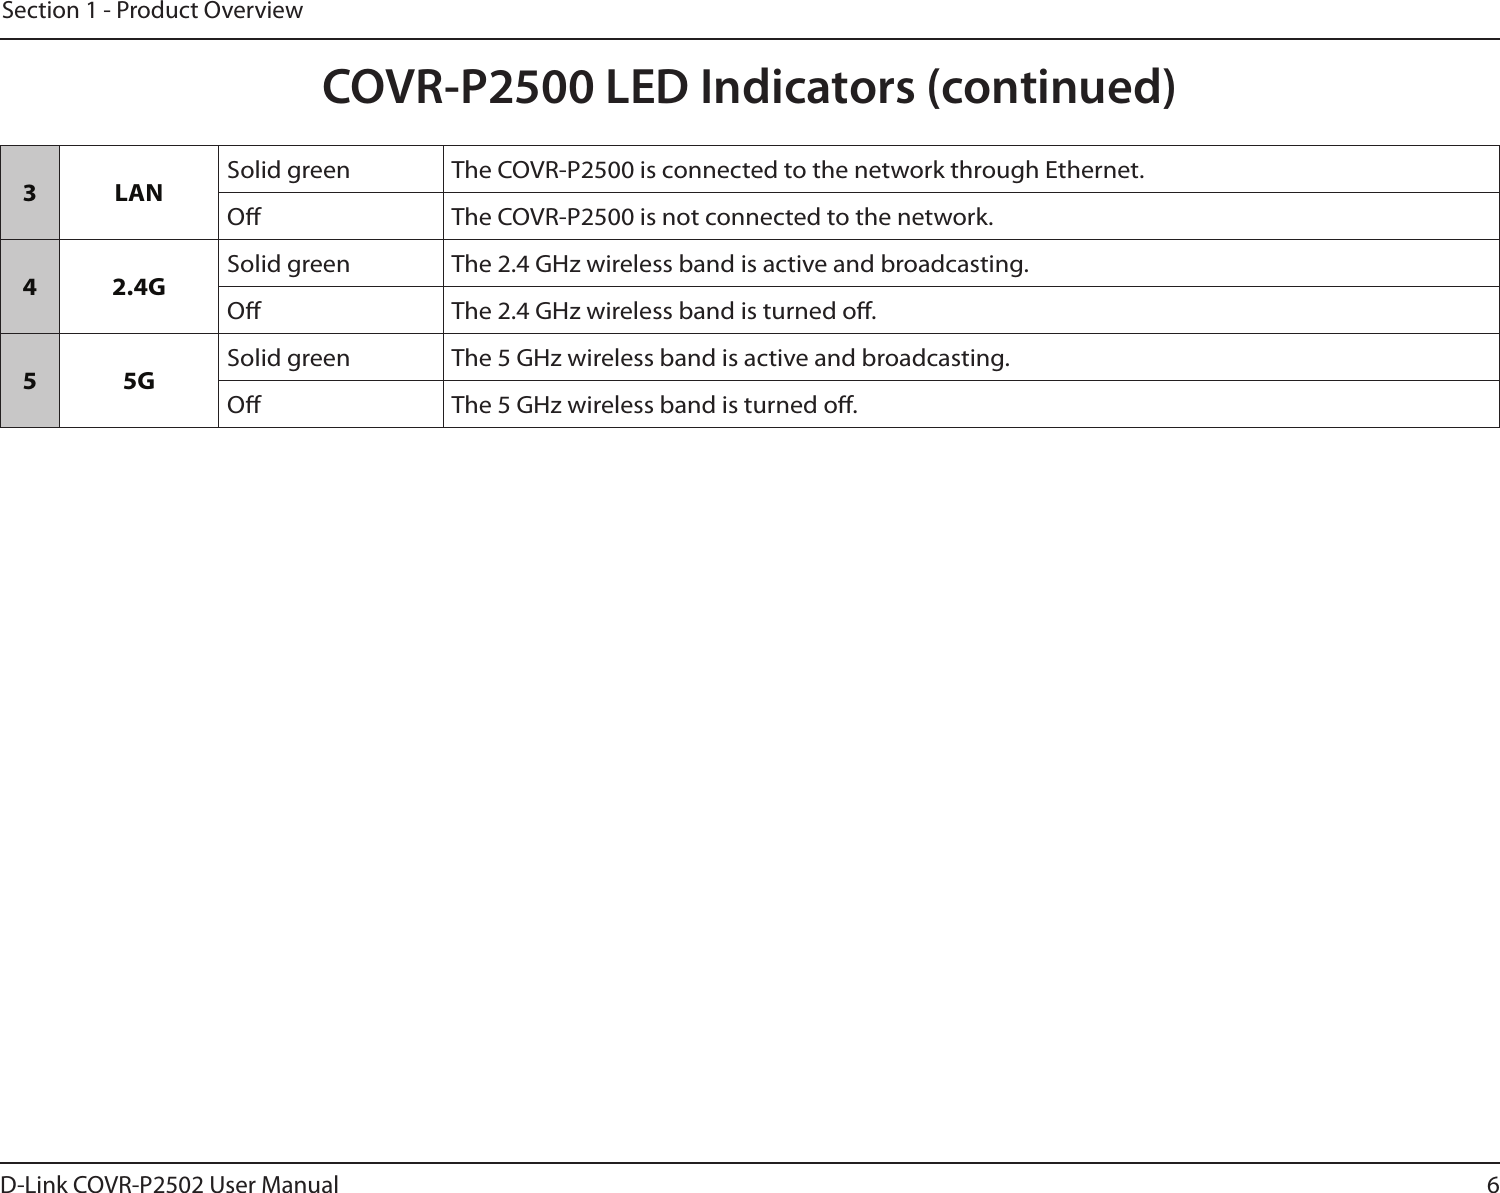 6D-Link COVR-P2502 User ManualSection 1 - Product Overview3 LAN Solid green The COVR-P2500 is connected to the network through Ethernet.O The COVR-P2500 is not connected to the network.4 2.4G Solid green The 2.4 GHz wireless band is active and broadcasting.O The 2.4 GHz wireless band is turned o.5 5G Solid green The 5 GHz wireless band is active and broadcasting.O The 5 GHz wireless band is turned o.COVR-P2500 LED Indicators (continued)